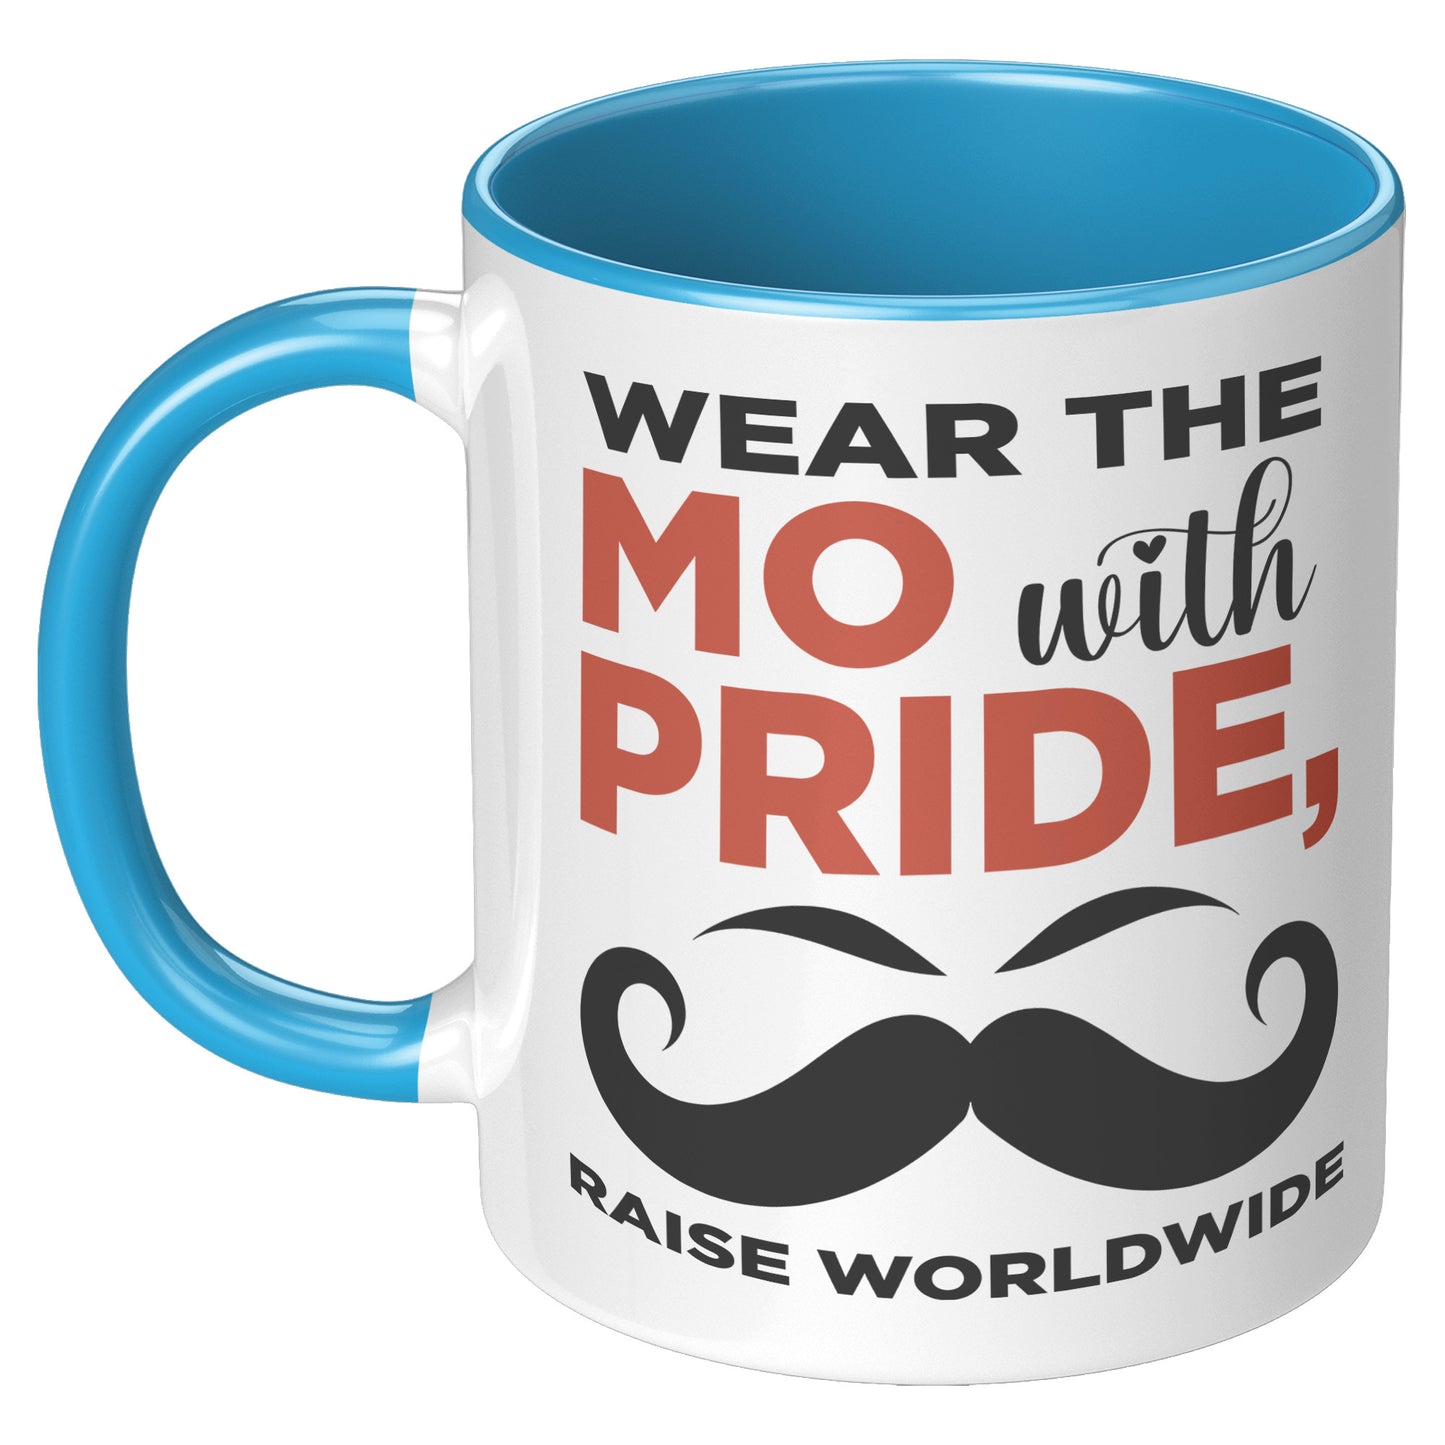 11oz Accent Mug Movember Wear The MO with Pride Raise Worldwide Both Side